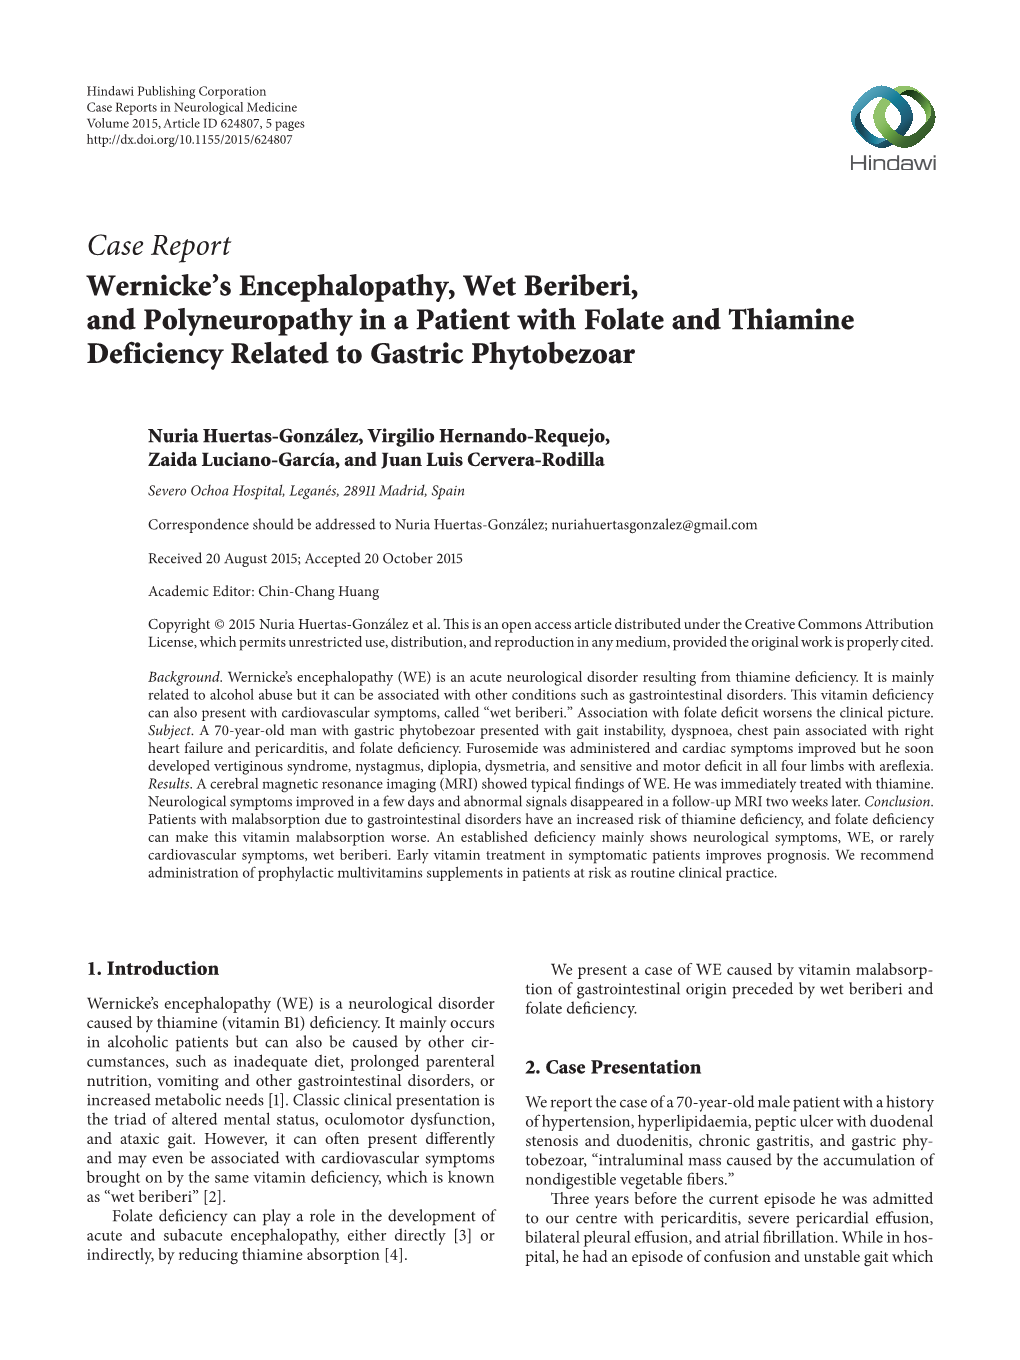 Wernicke's Encephalopathy, Wet Beriberi, and Polyneuropathy in a Patient with Folate and Thiamine Deficiency Related to Gastric Phytobezoar